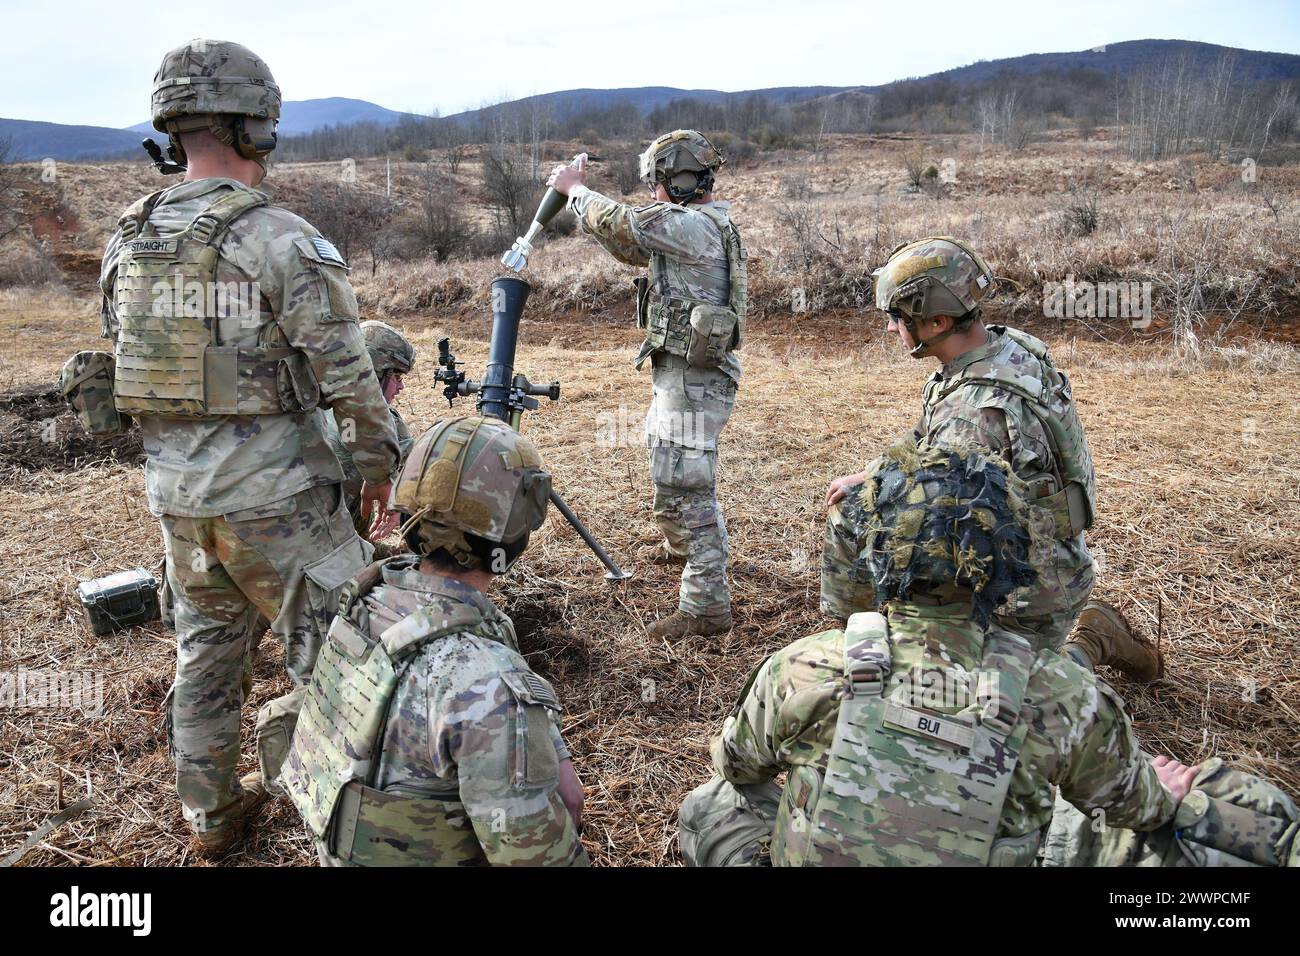 U.S. Army Paratroopers assigned to the 1st Battalion, 503rd Infantry Regiment, 173rd Airborne Brigade fire an M252 81 mm mortar system during Eagle Ursa exercise at the training range in Slunj, Croatia, Feb. 24, 2024. The 173rd Airborne Brigade is the U.S. Army's Contingency Response Force in Europe, providing rapidly deployable forces to the United States European, African, and Central Command areas of responsibility. Forward deployed across Italy and Germany, the brigade routinely trains alongside NATO allies and partners to build partnerships and strengthen the alliance.  Army Stock Photo